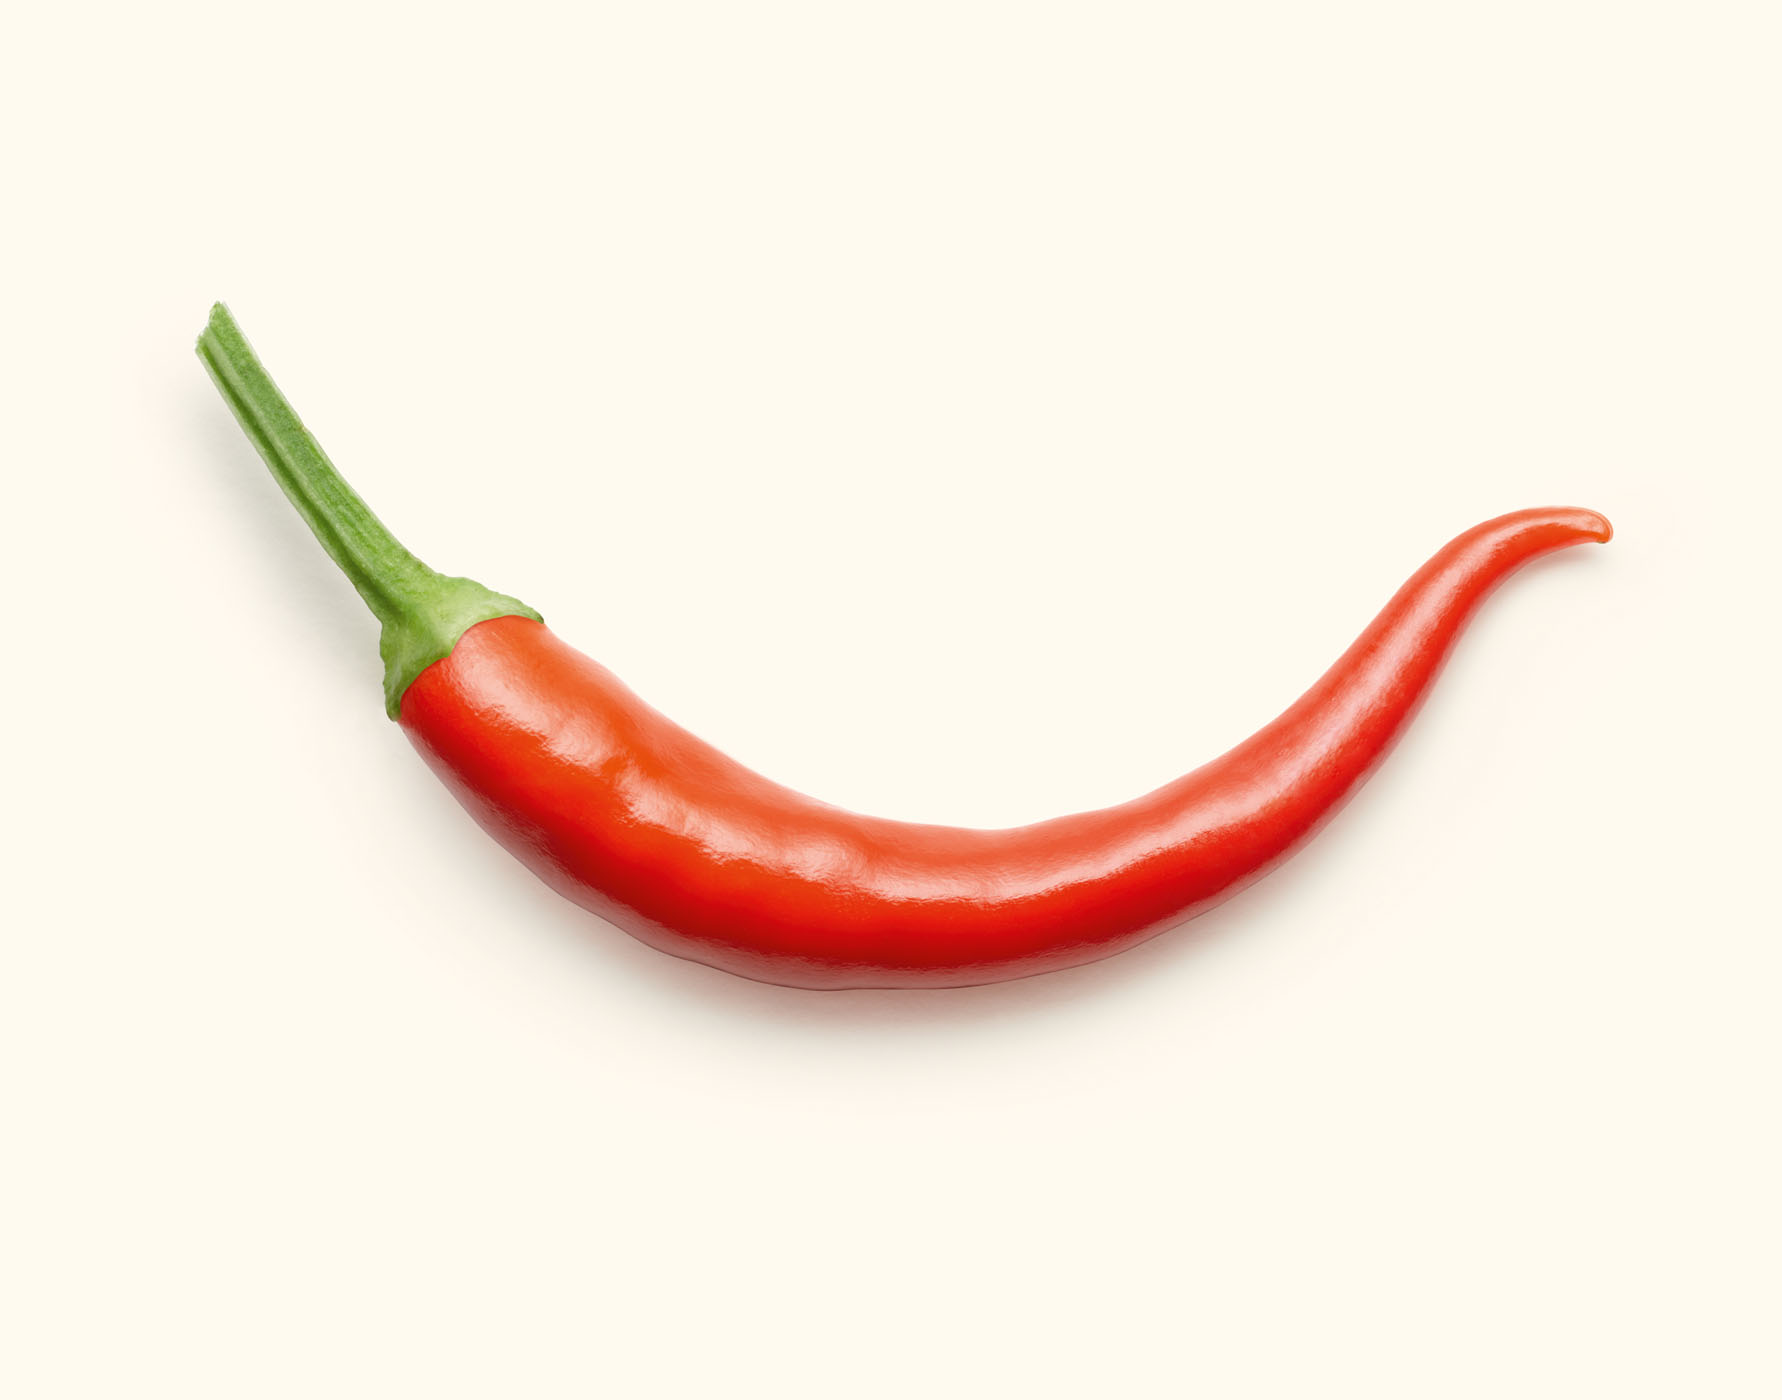 Chilli by Alexander Kent London based still life and product photographer.